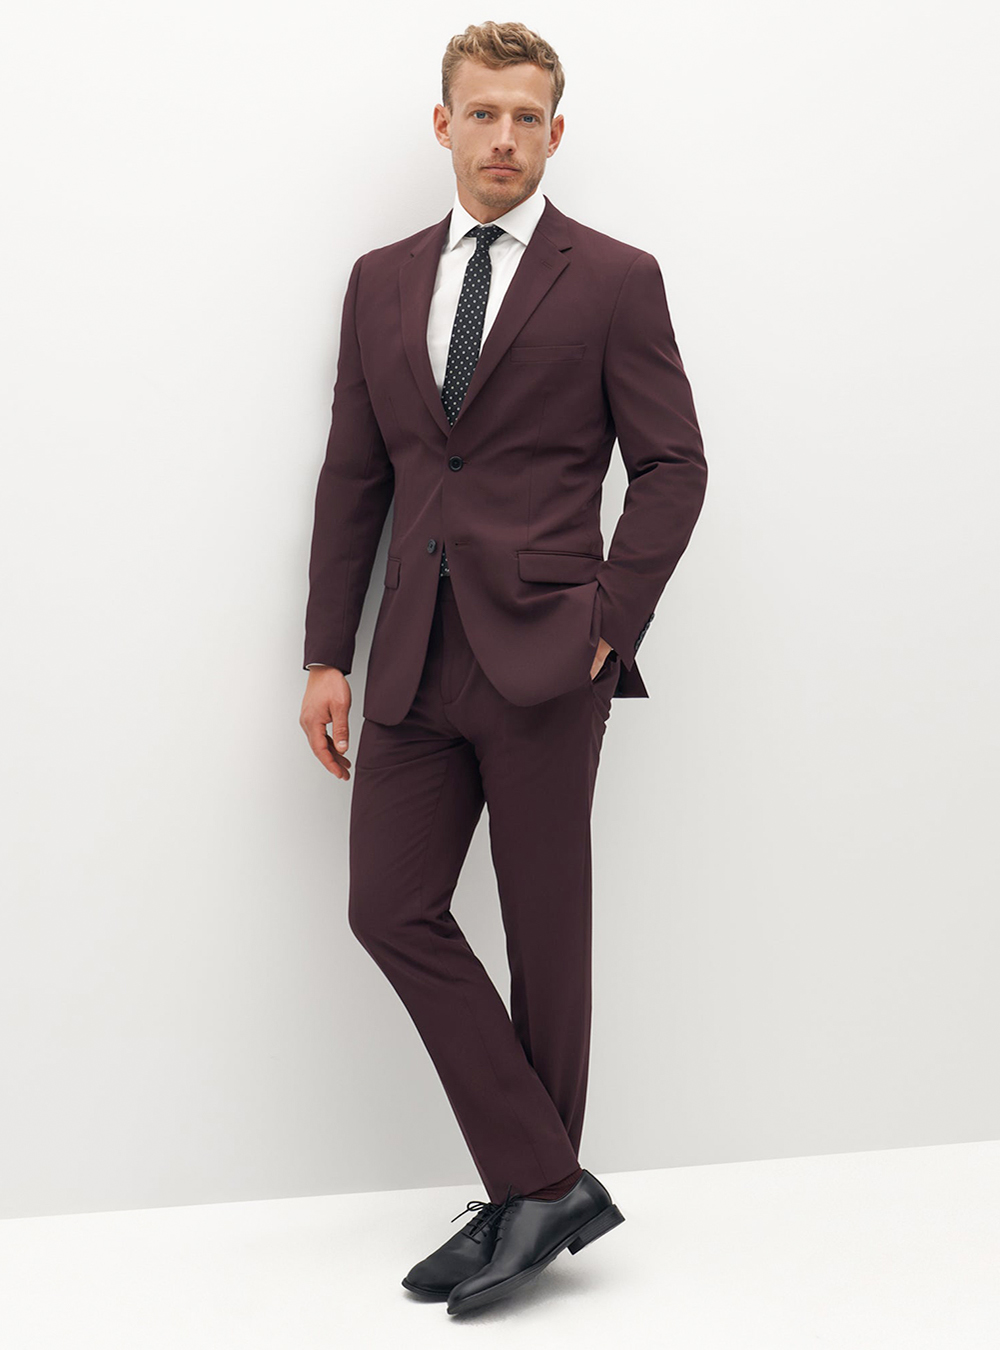 Burgundy suit, white dress shirt, black dotted tie and black oxford shoes